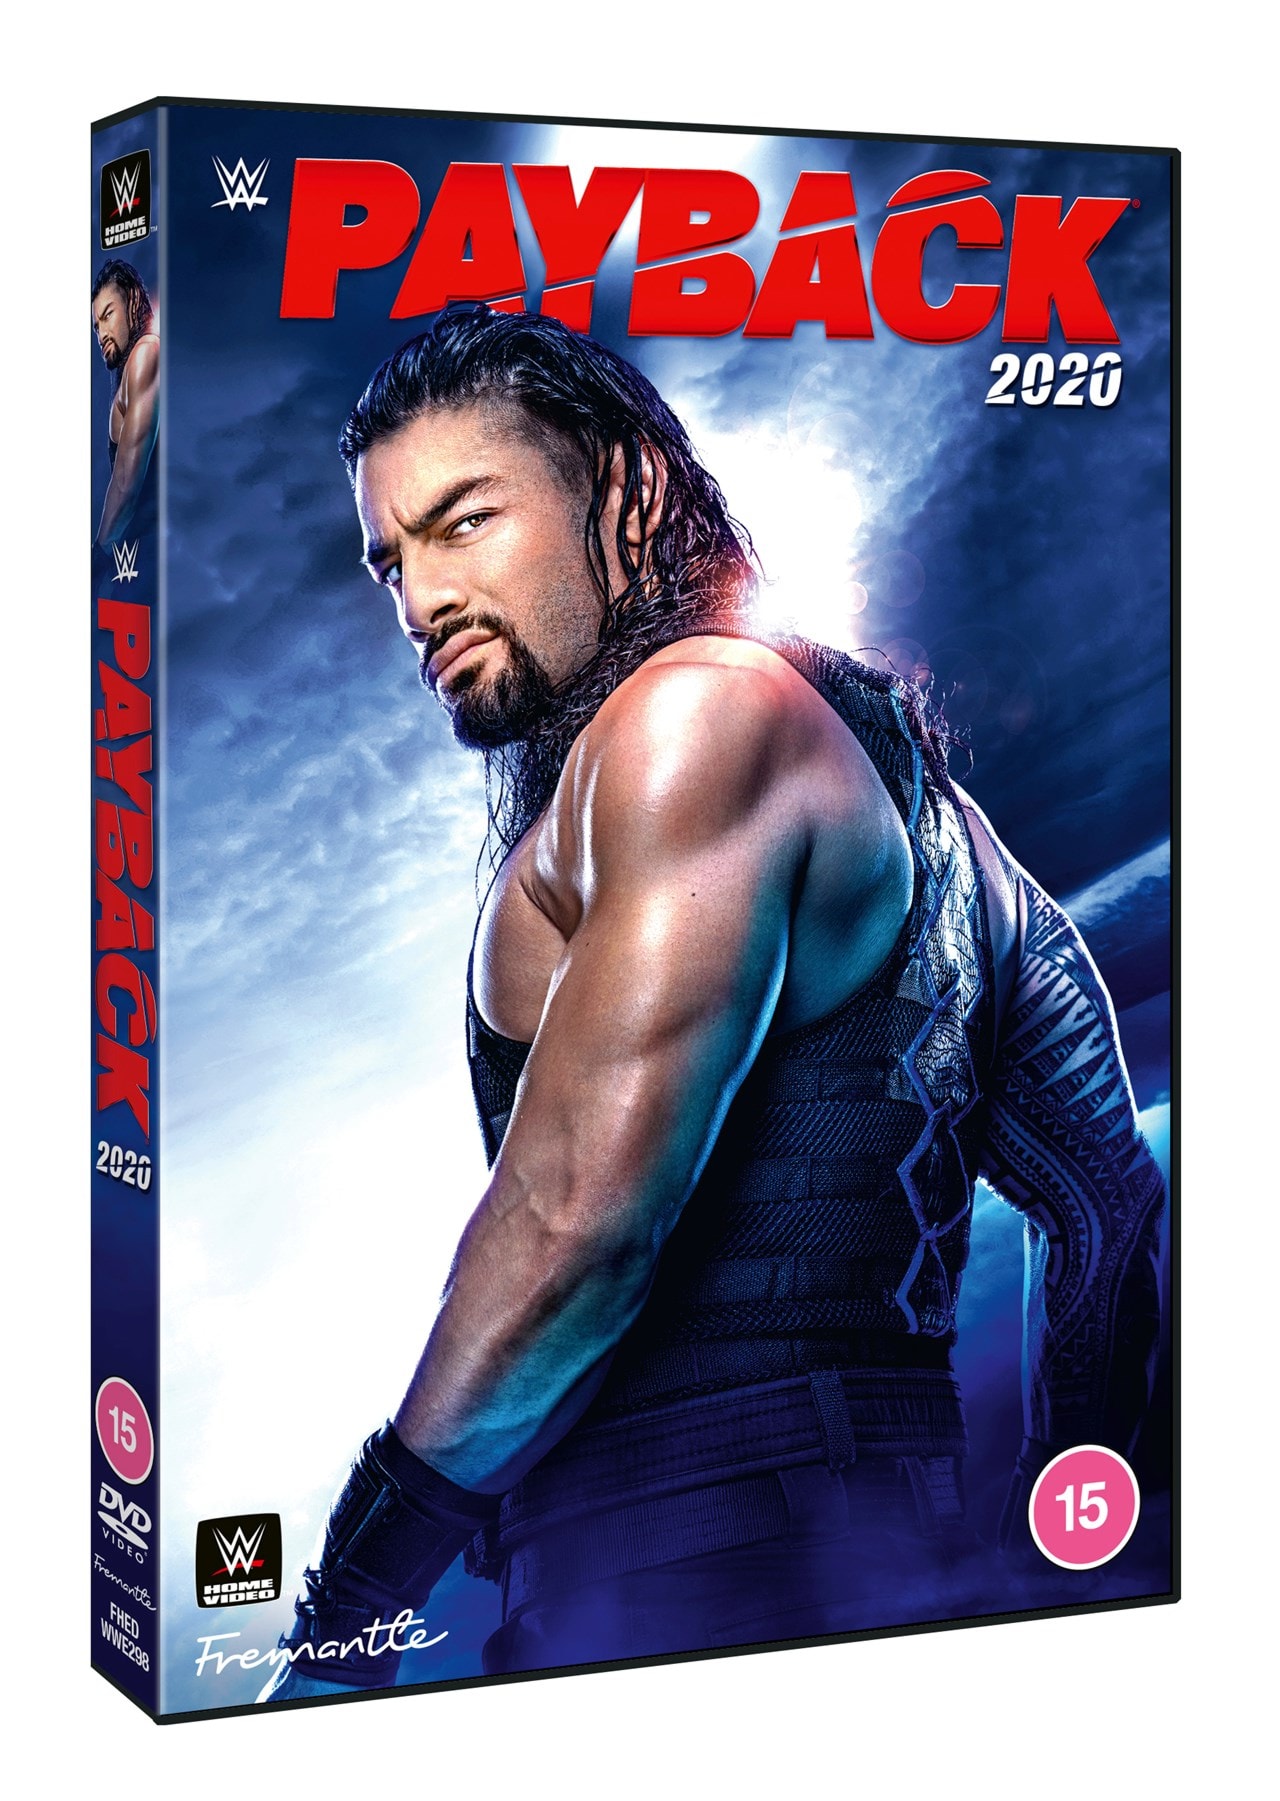 WWE Payback 2020 DVD Free shipping over £20 HMV Store